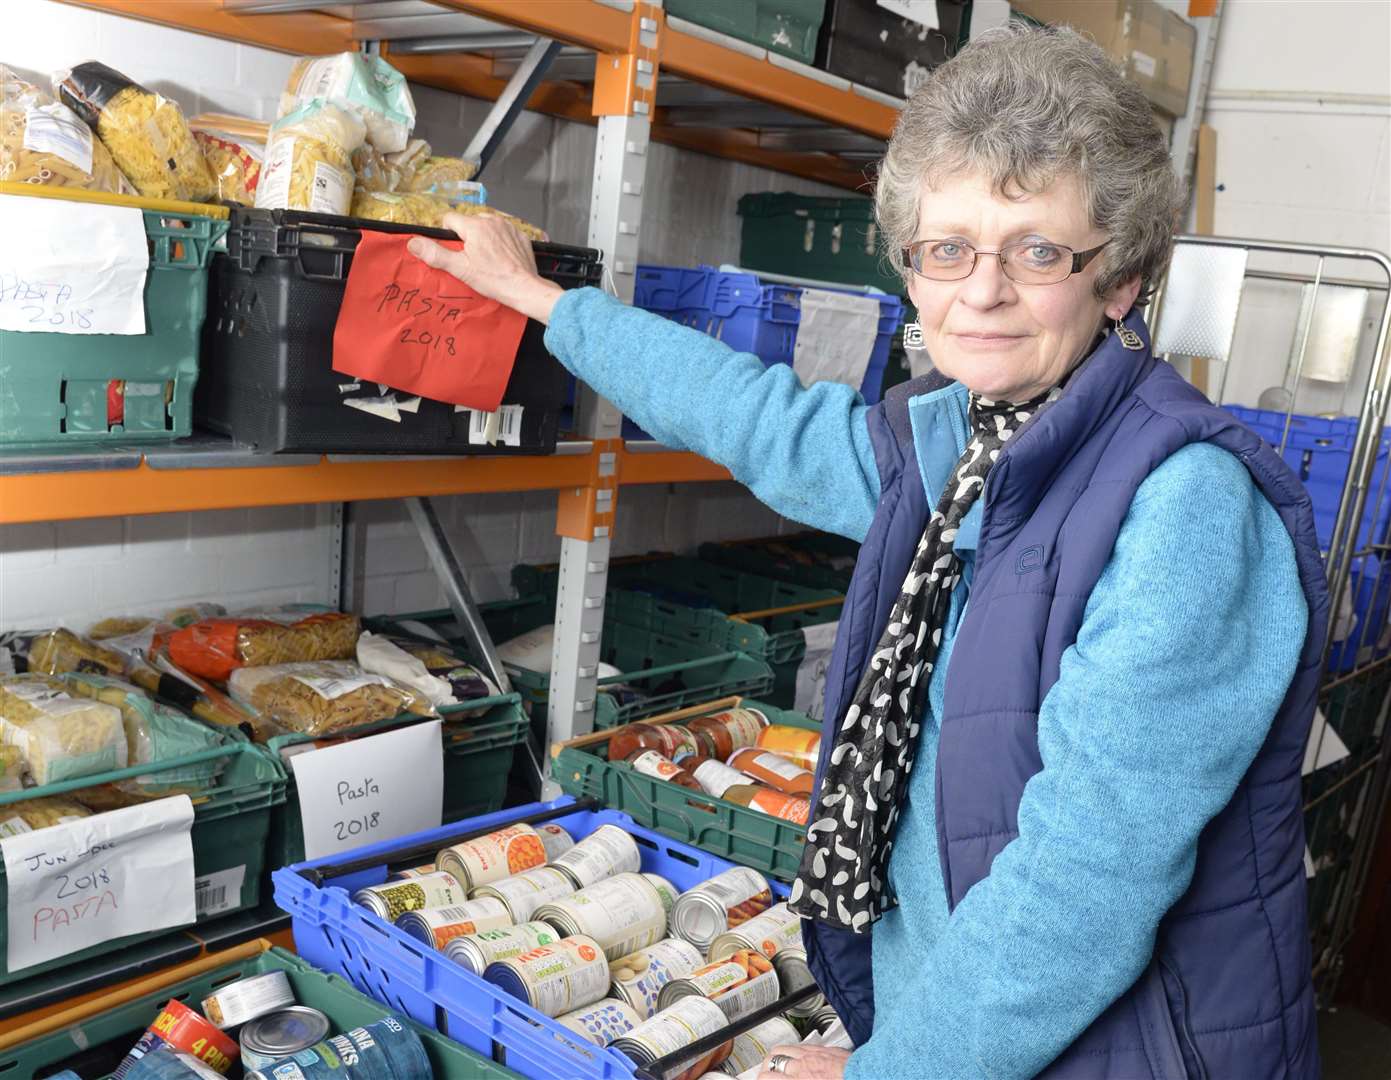 Project coordinator Sheila Ward is keen to fill the foodbank's shelves ahead of Christmas. Picture: Chris Davey